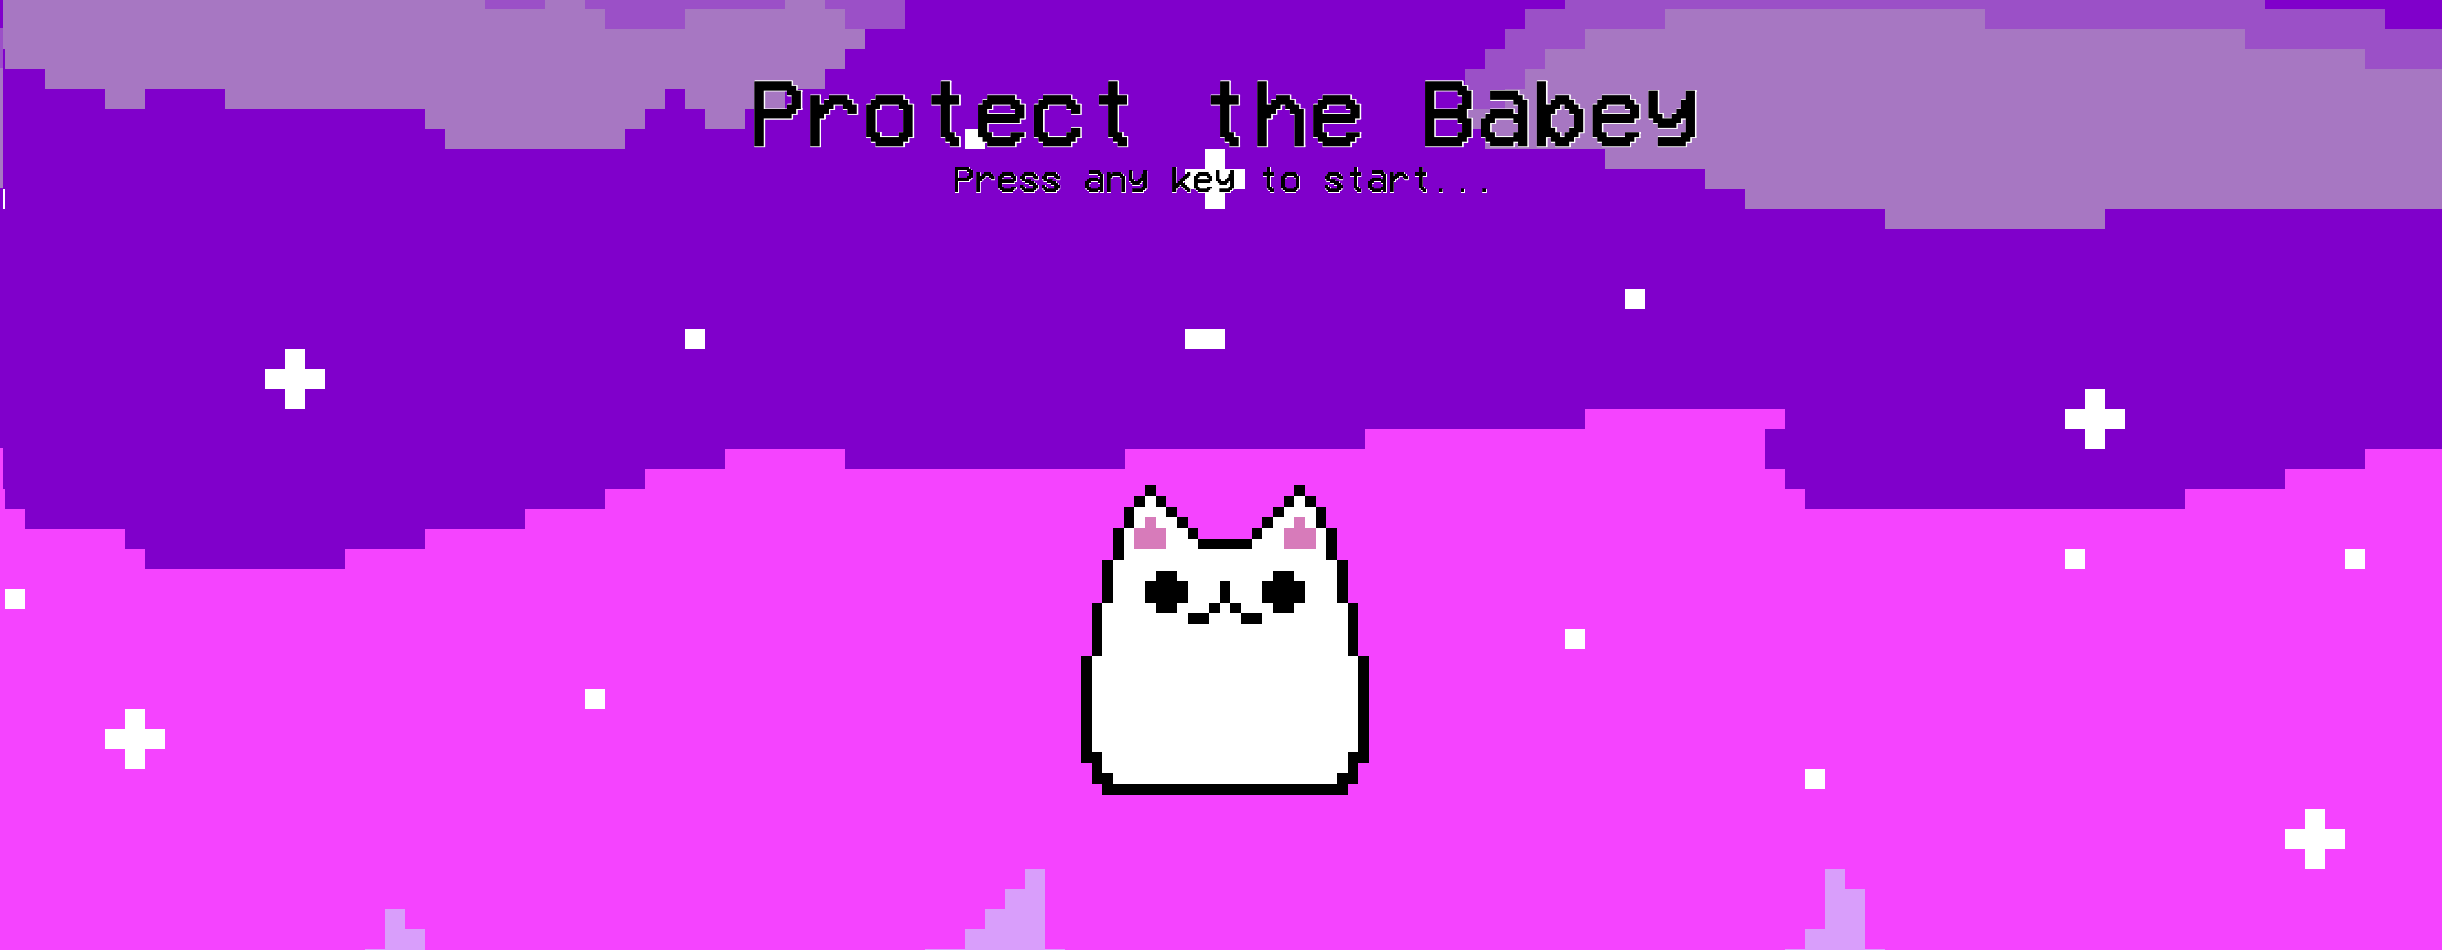 Protect the Babey